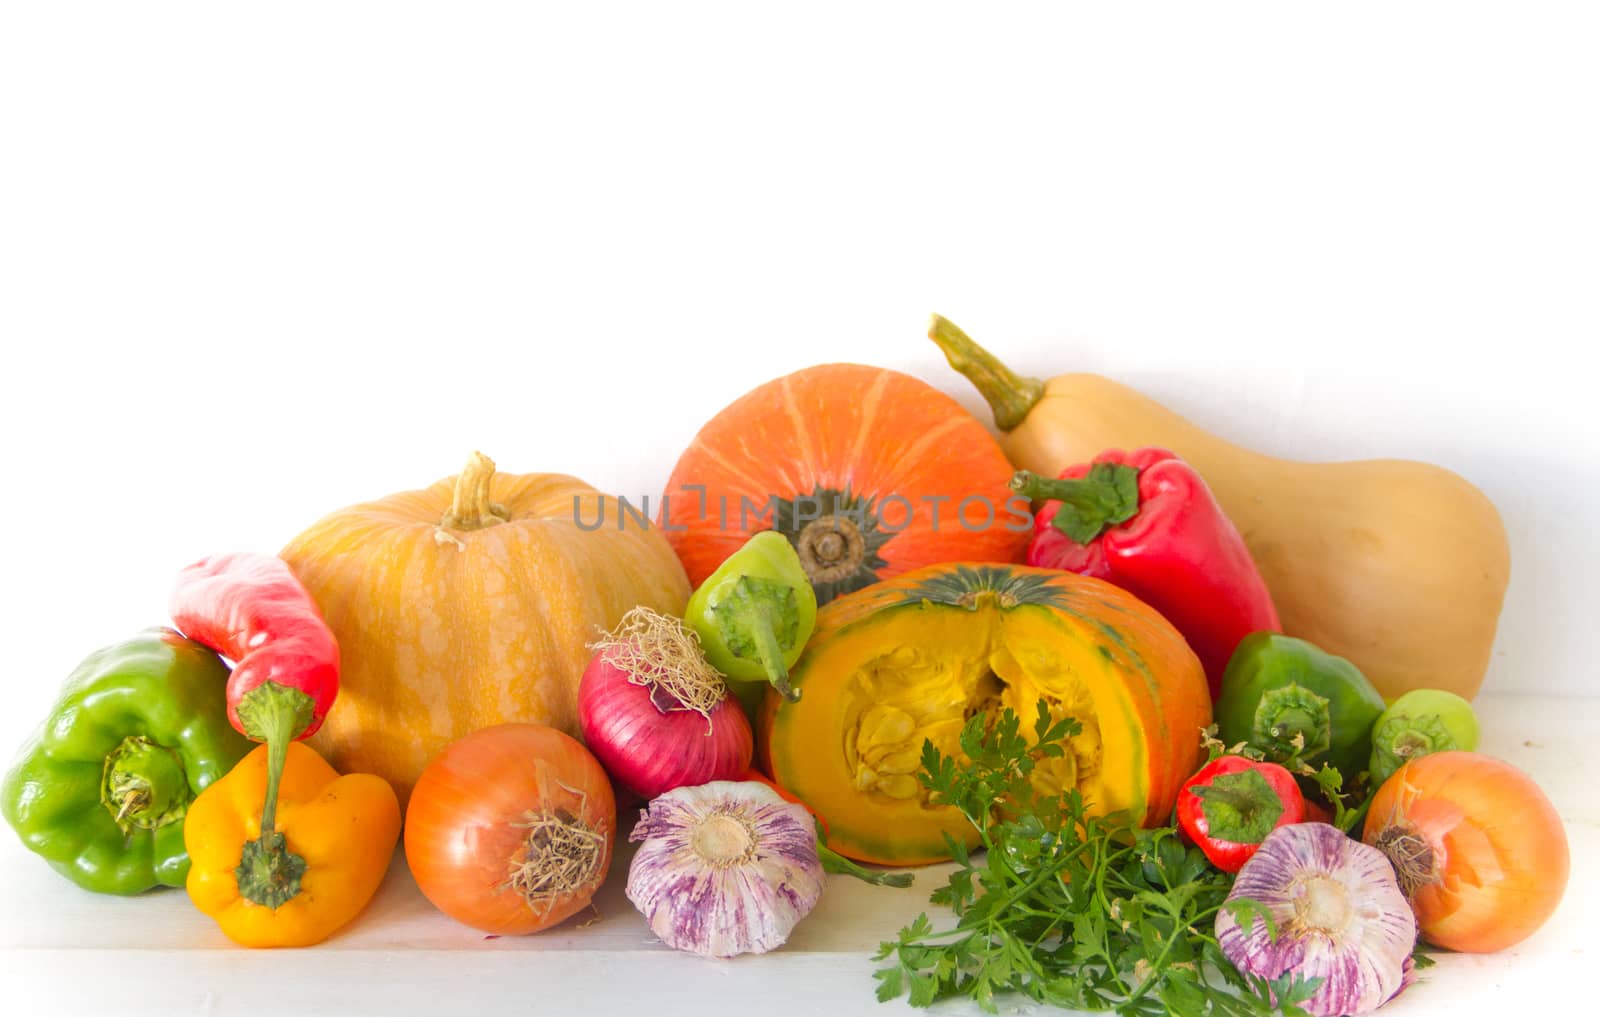 squash and assorted vegetables by GabrielaBertolini